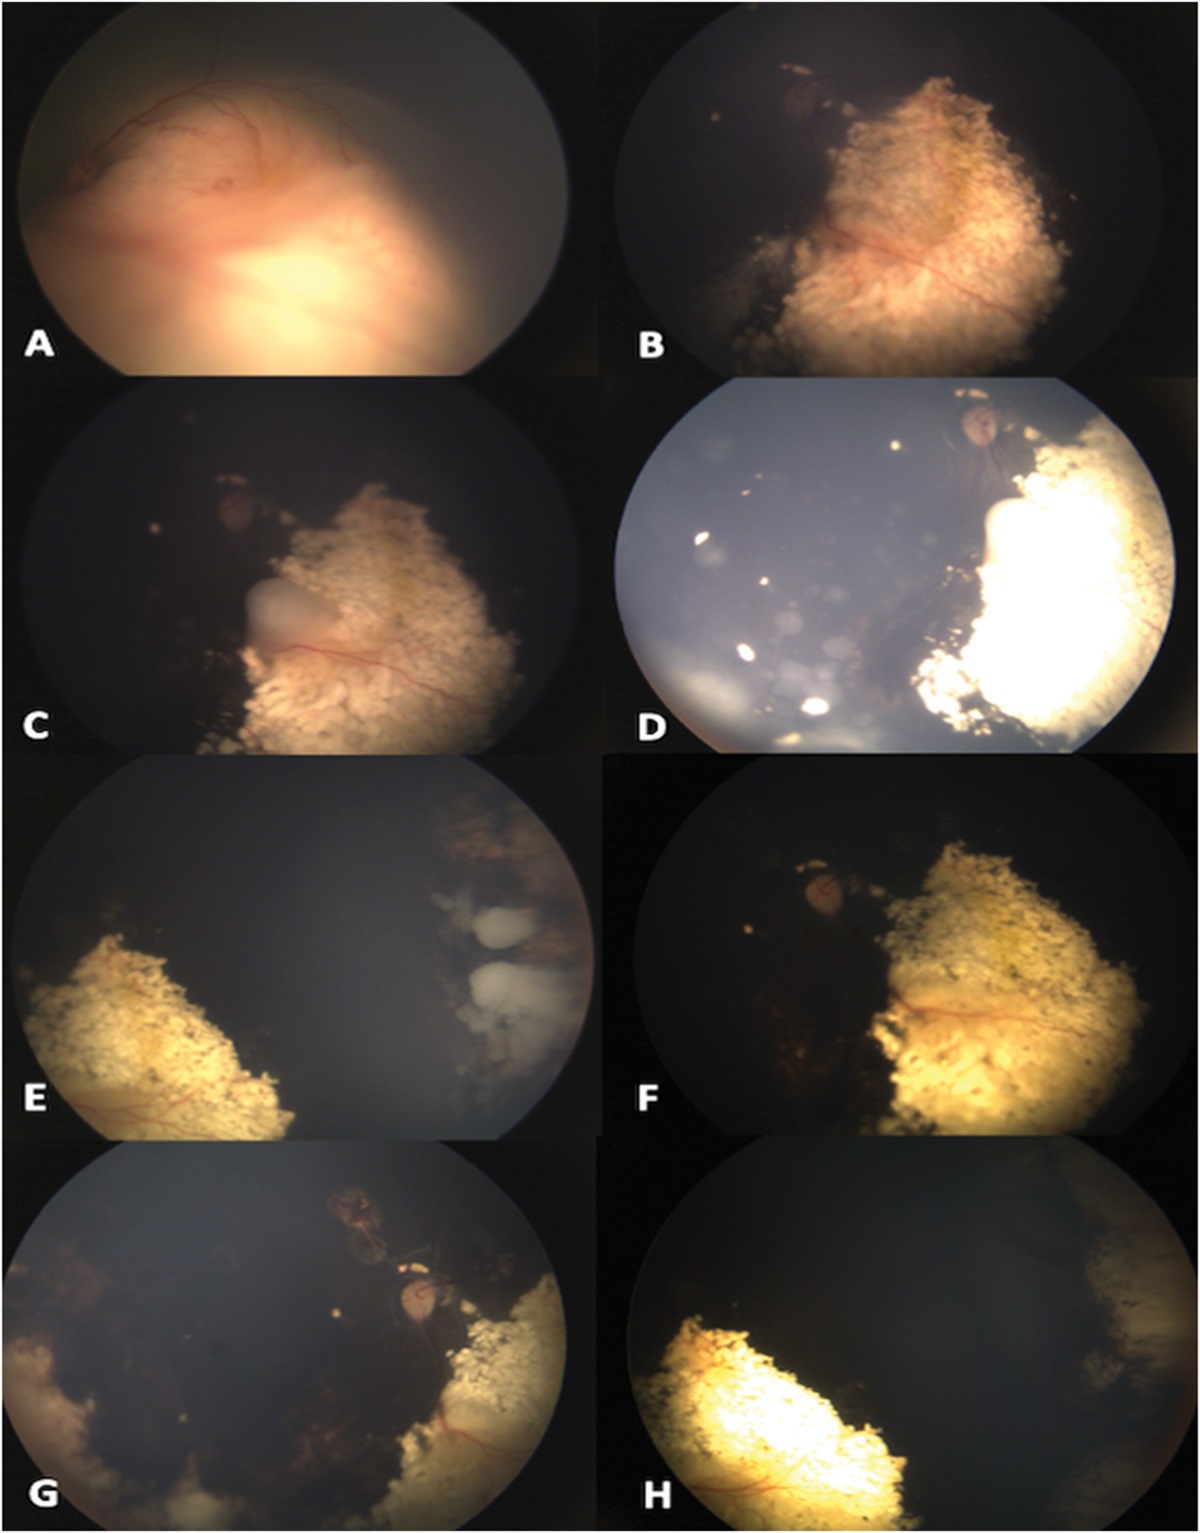 SECONDARY SALVAGE INTRAVENOUS CHEMOTHERAPY FOR REFRACTORY/RECURRENT RETINOBLASTOMA: A Study of 41 Eyes